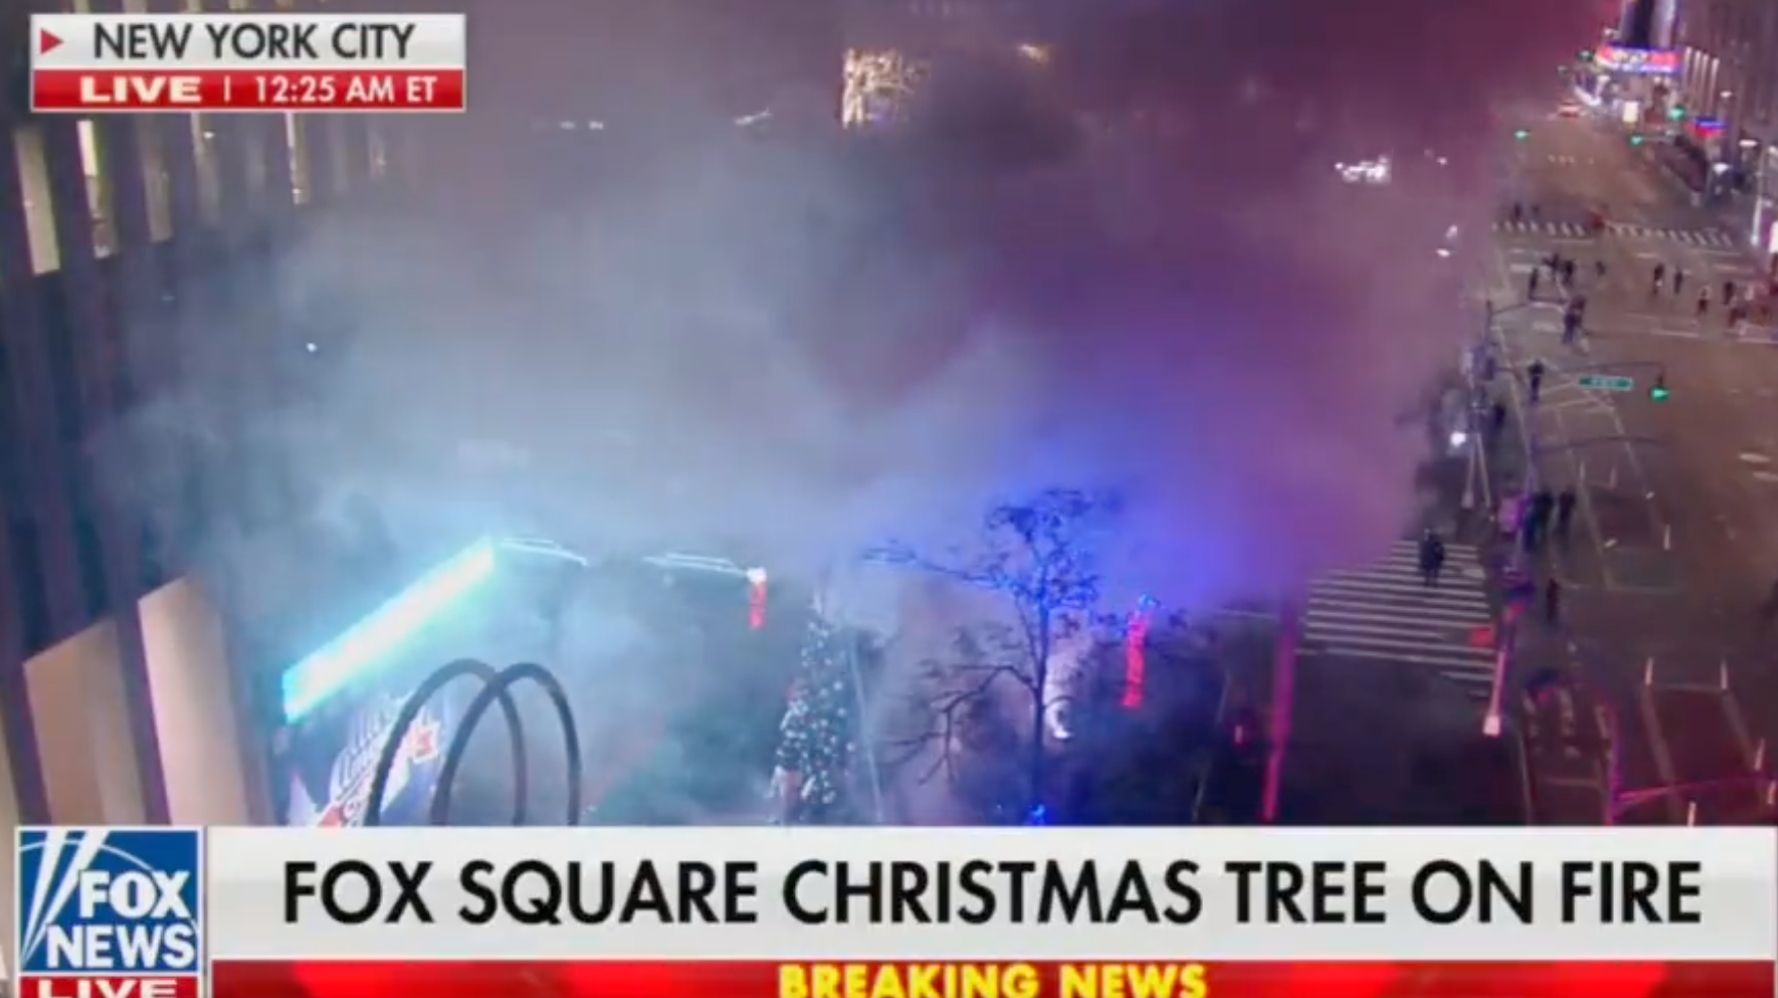 Man Held As Fox News' Giant Christmas Tree Goes Up In Flames